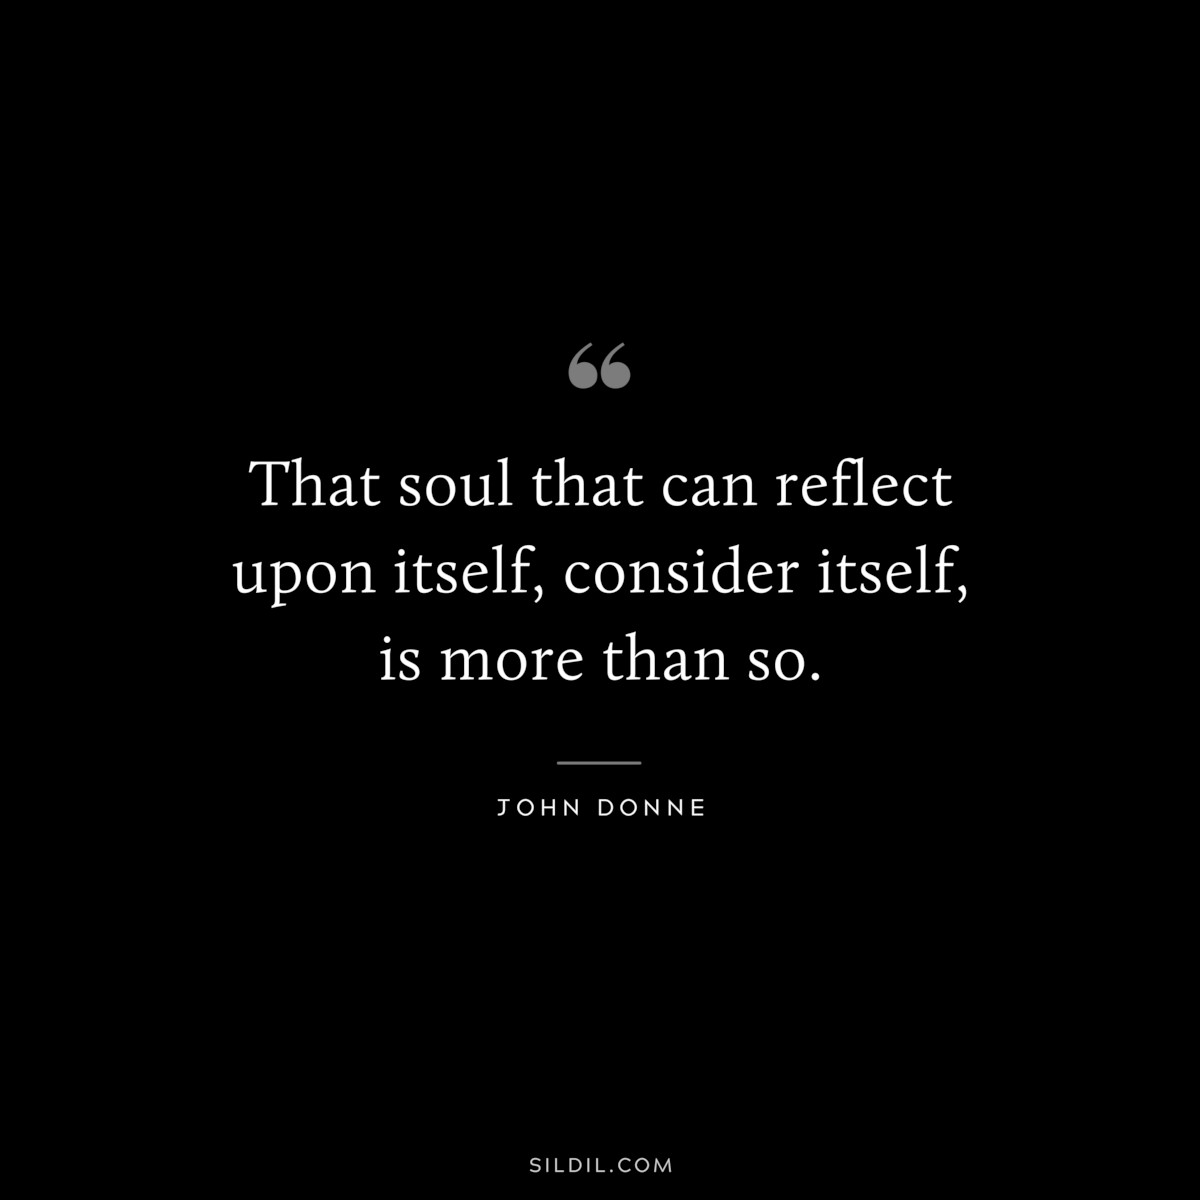 That soul that can reflect upon itself, consider itself, is more than so. ― John Donne